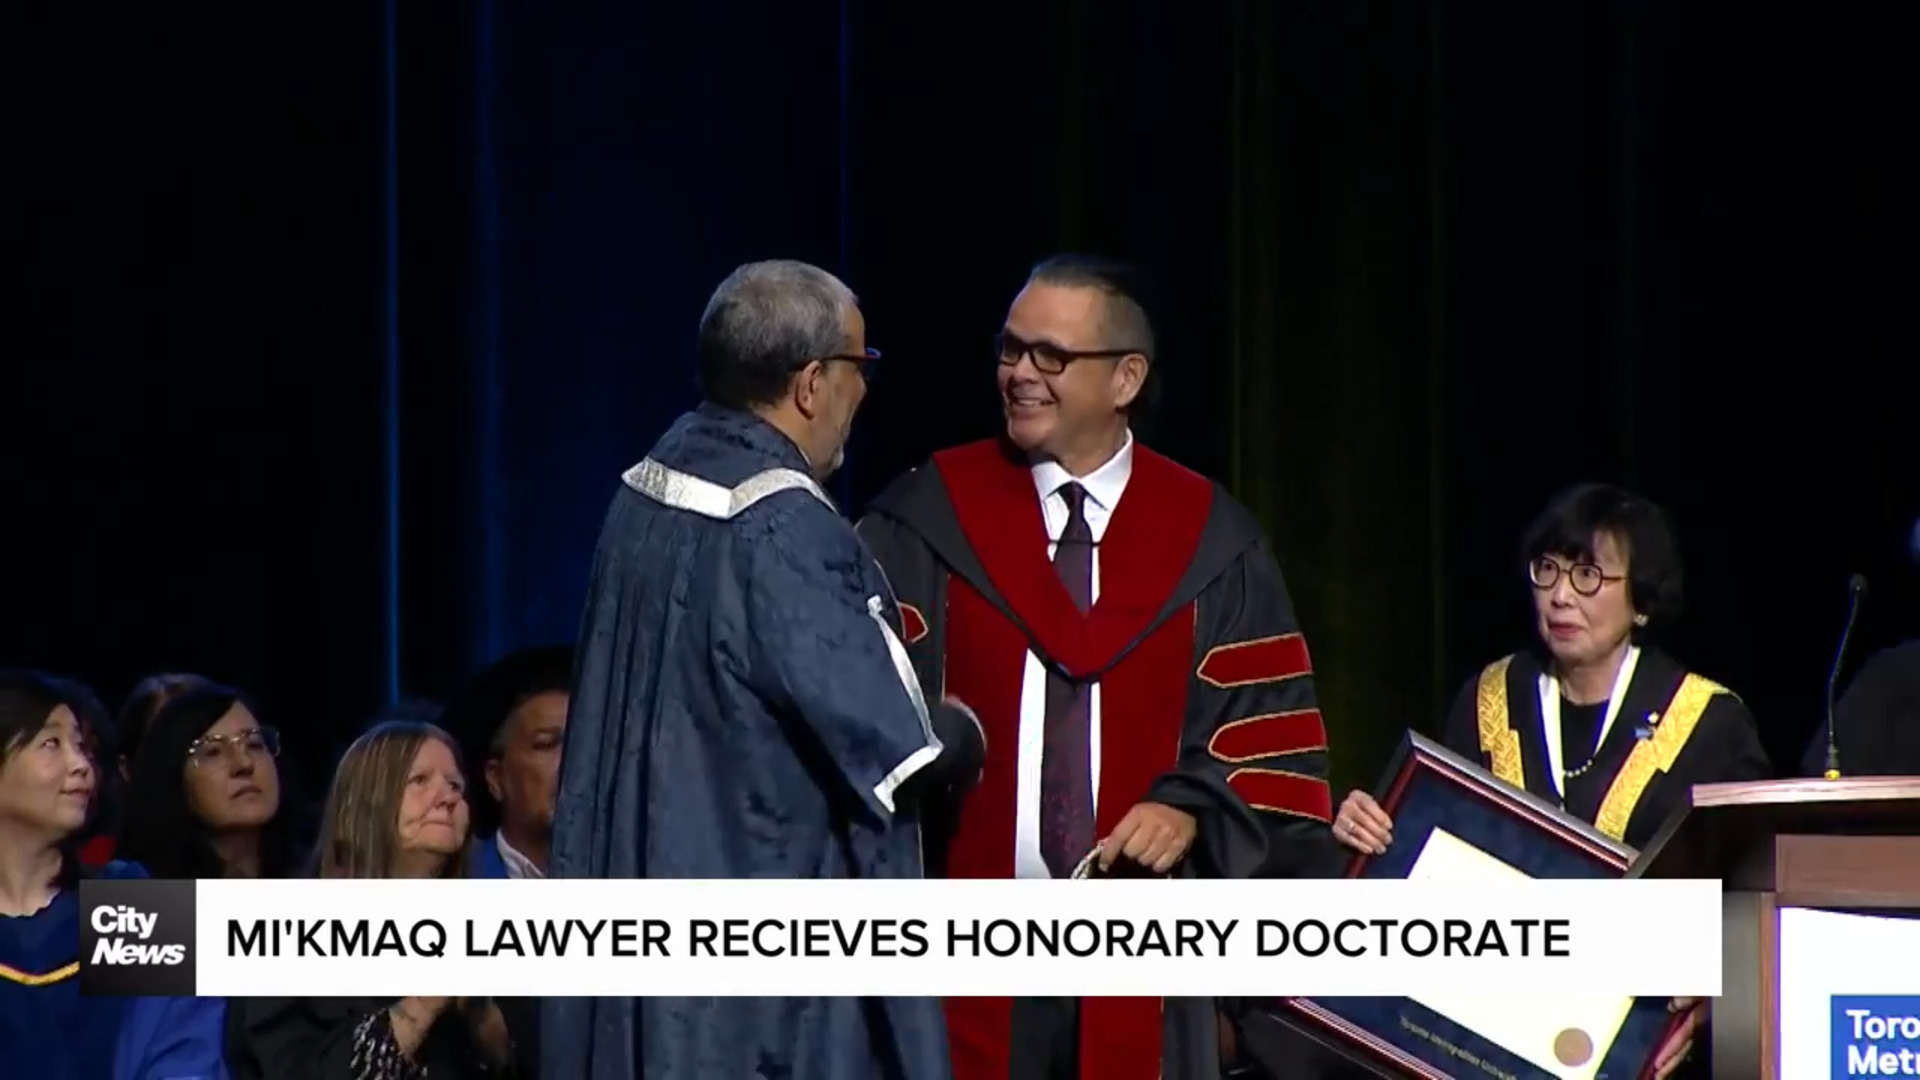 Canada's first lawyer from Mi'kmaq Nation receives honorary doctorate